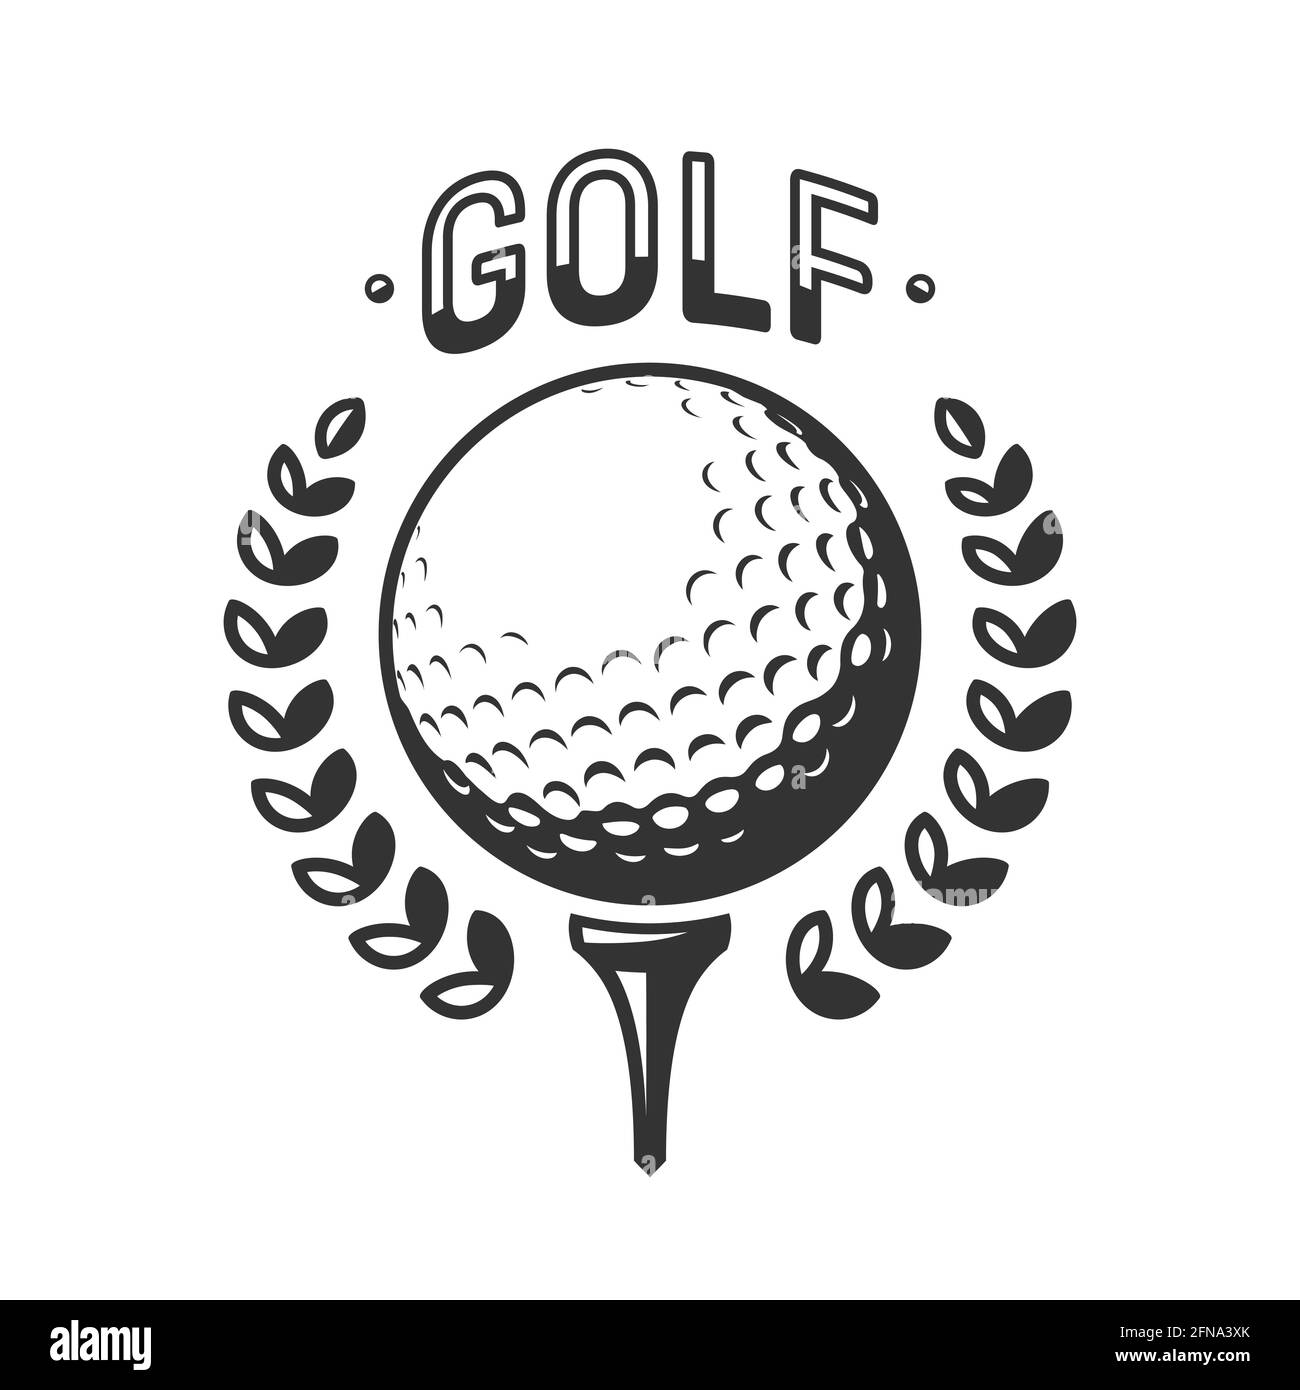 Golf vector logo. Golf ball on tee with wreath. Vector illustration, isolated on a white background Stock Vector